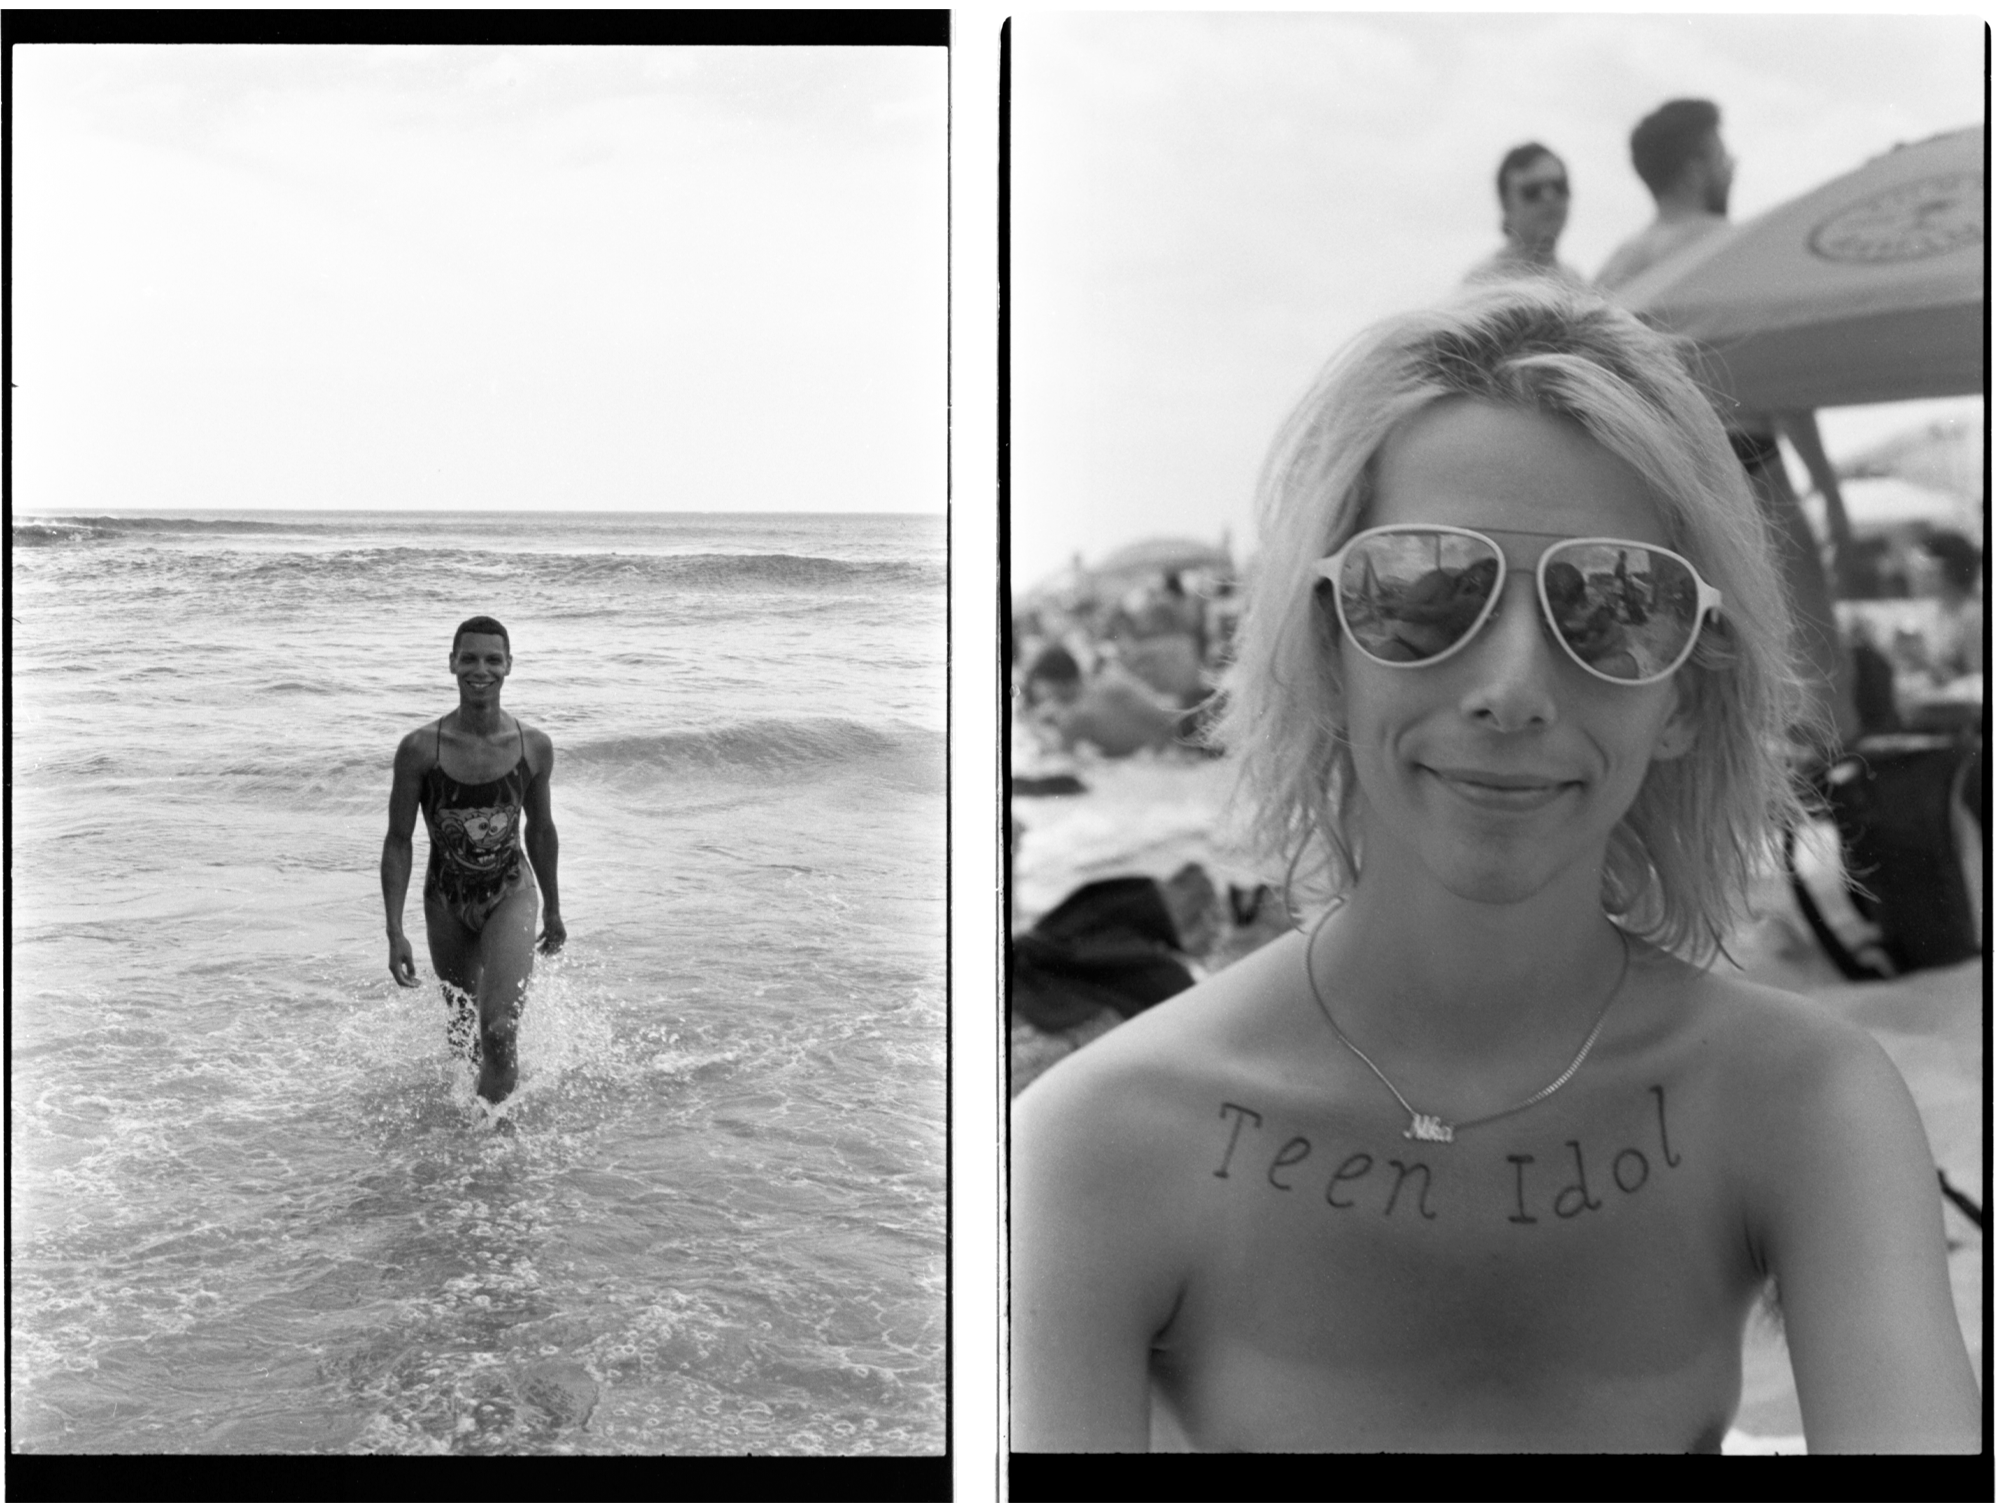 Two photographic portraits. In one, Andersson Lopez, wearing a Spongebob one-piece bathing suit, wades through the shallows at Riis Beach, walking toward the camera. In the other, Nika Lomazzo, sporting aviator sunglasses and showing an upper-chest tattoo reading "Teen Idol," smiles at the camera.